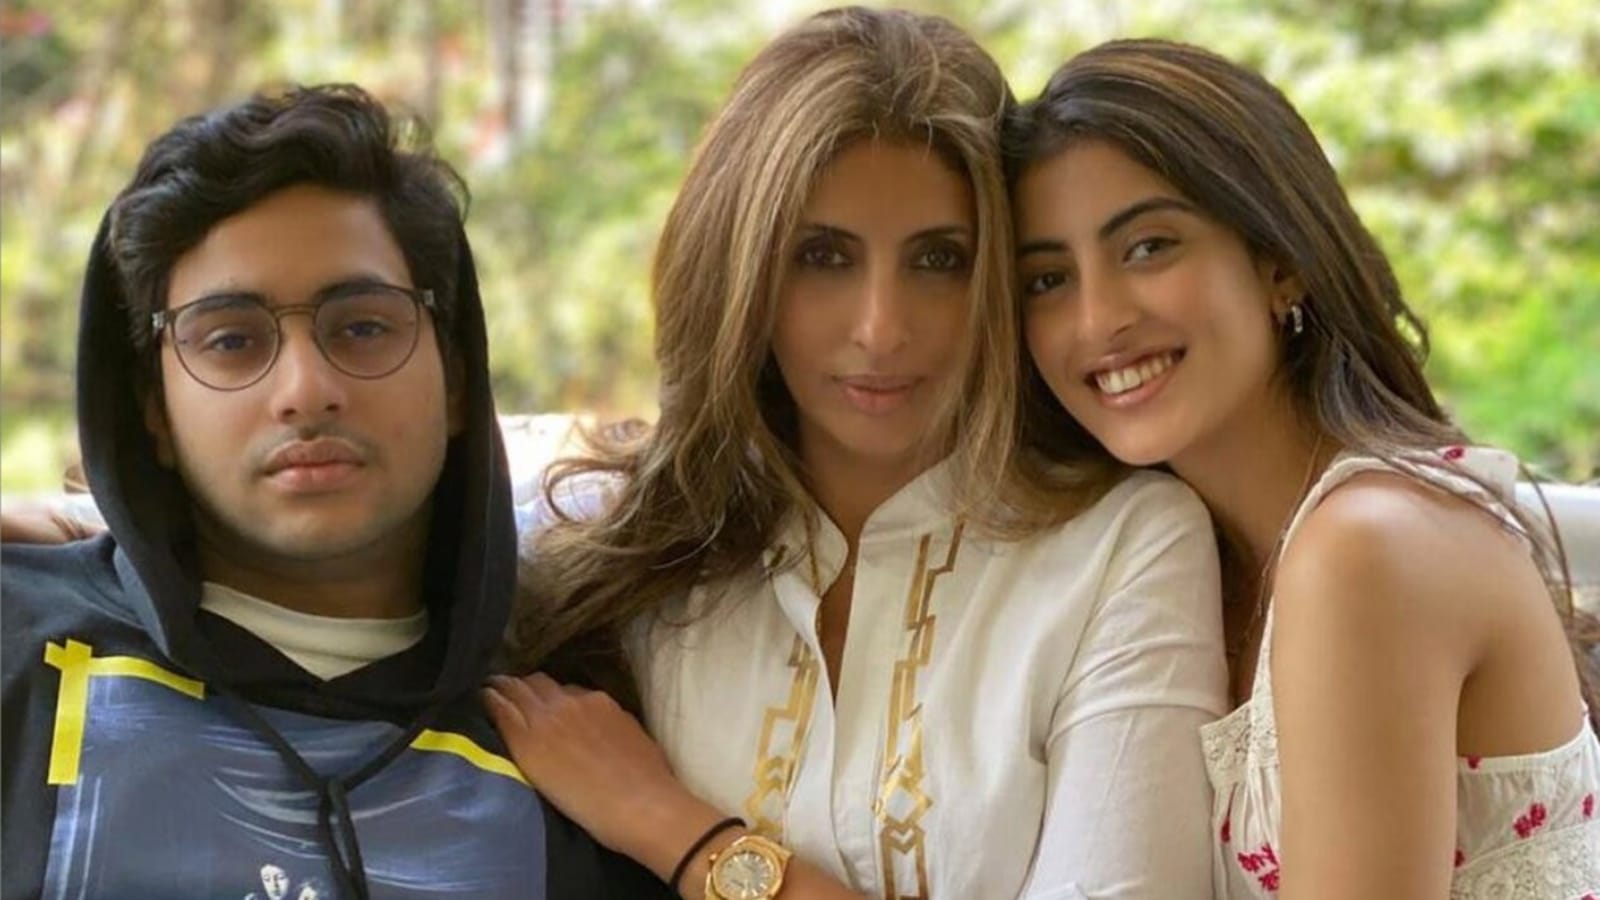 Shweta Bachchan says she’s not financially independent and ambitious, but wants Navya and Agastya to choose different